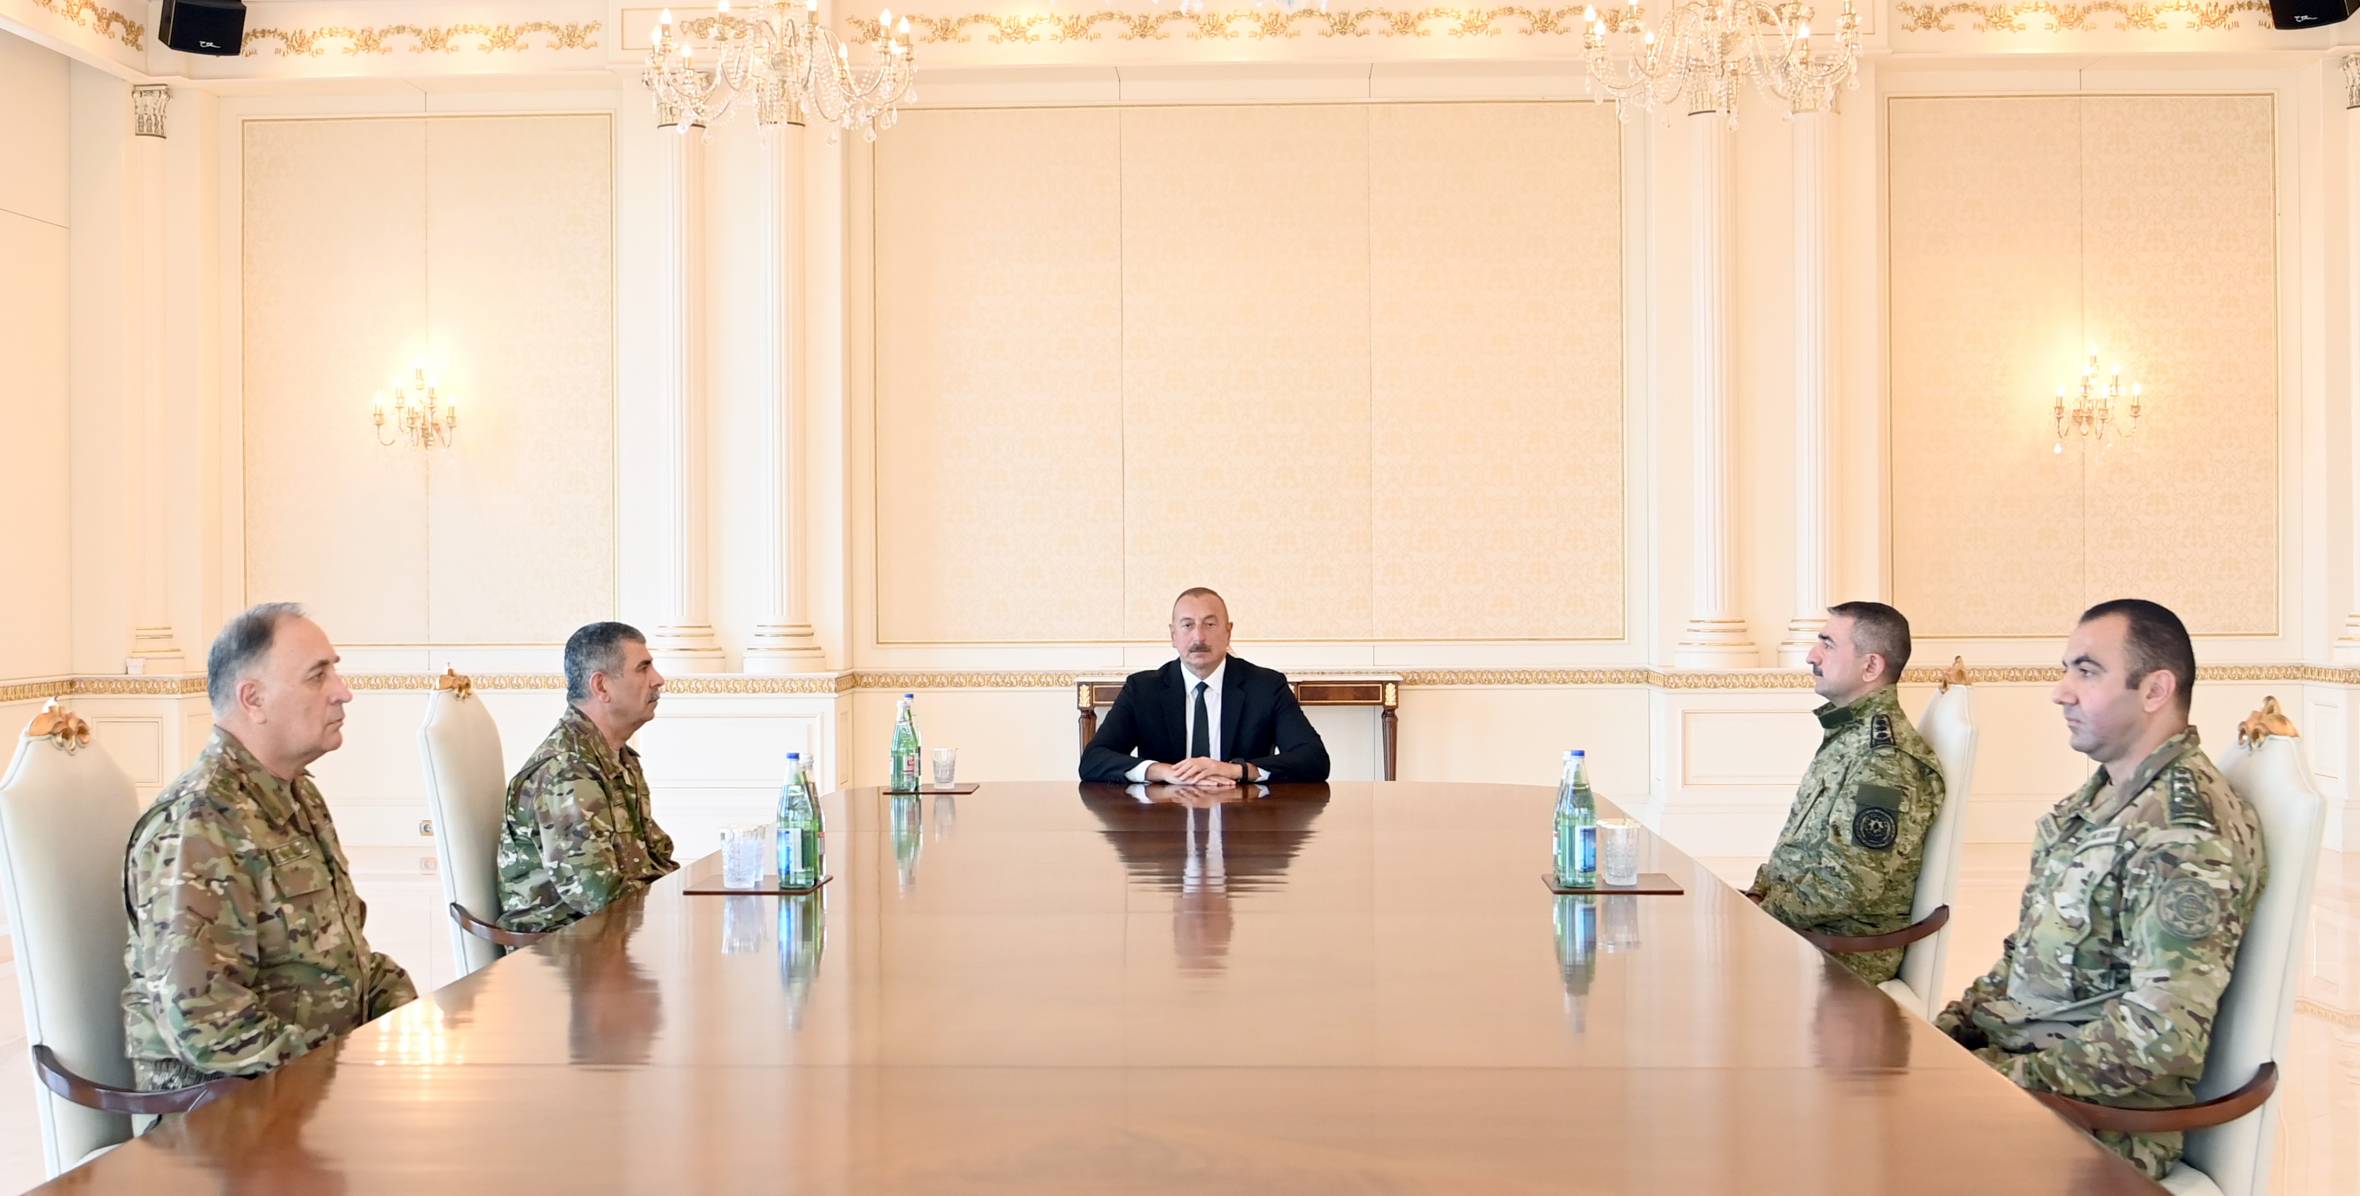 Ilham Aliyev held an operational meeting with the participation of the leadership of the Armed Forces